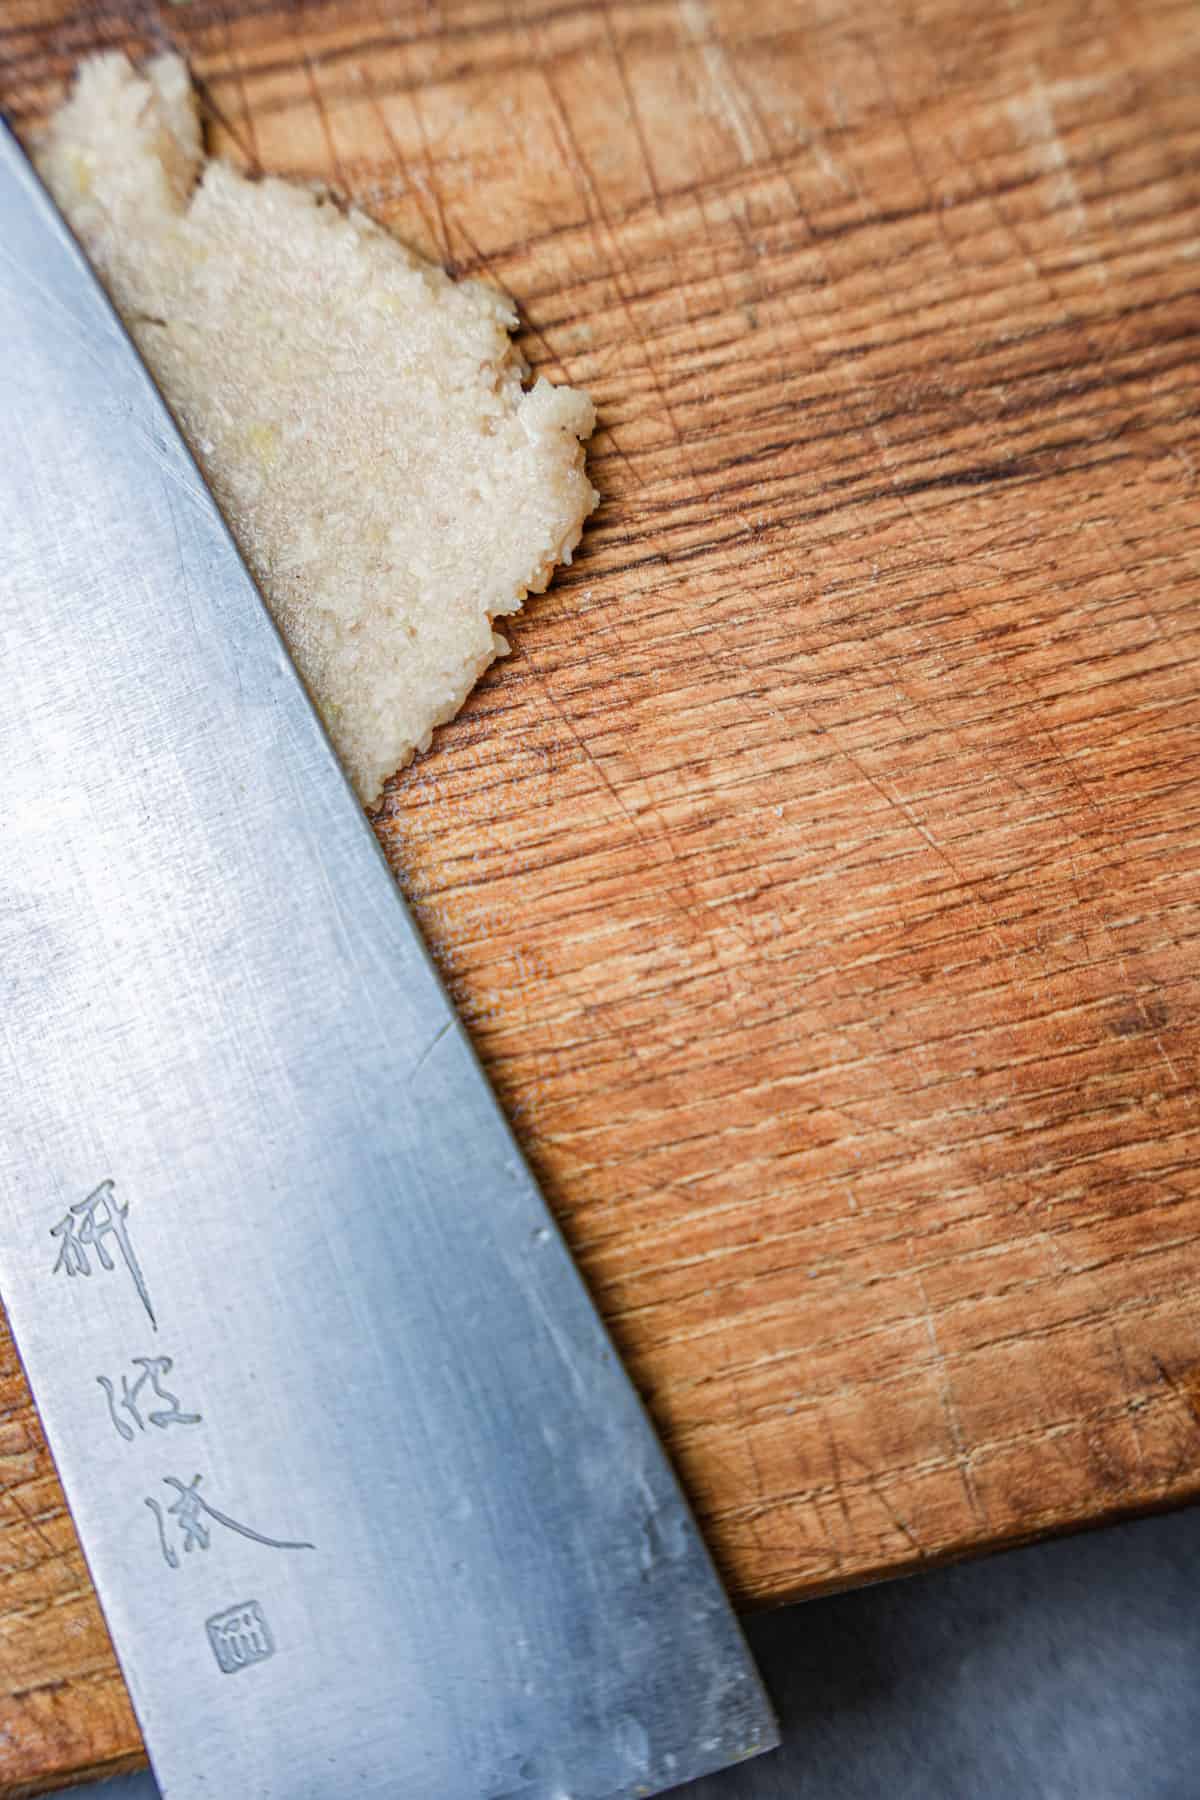 Garlic paste is pressed by the side of a knife on a wooden cutting board.